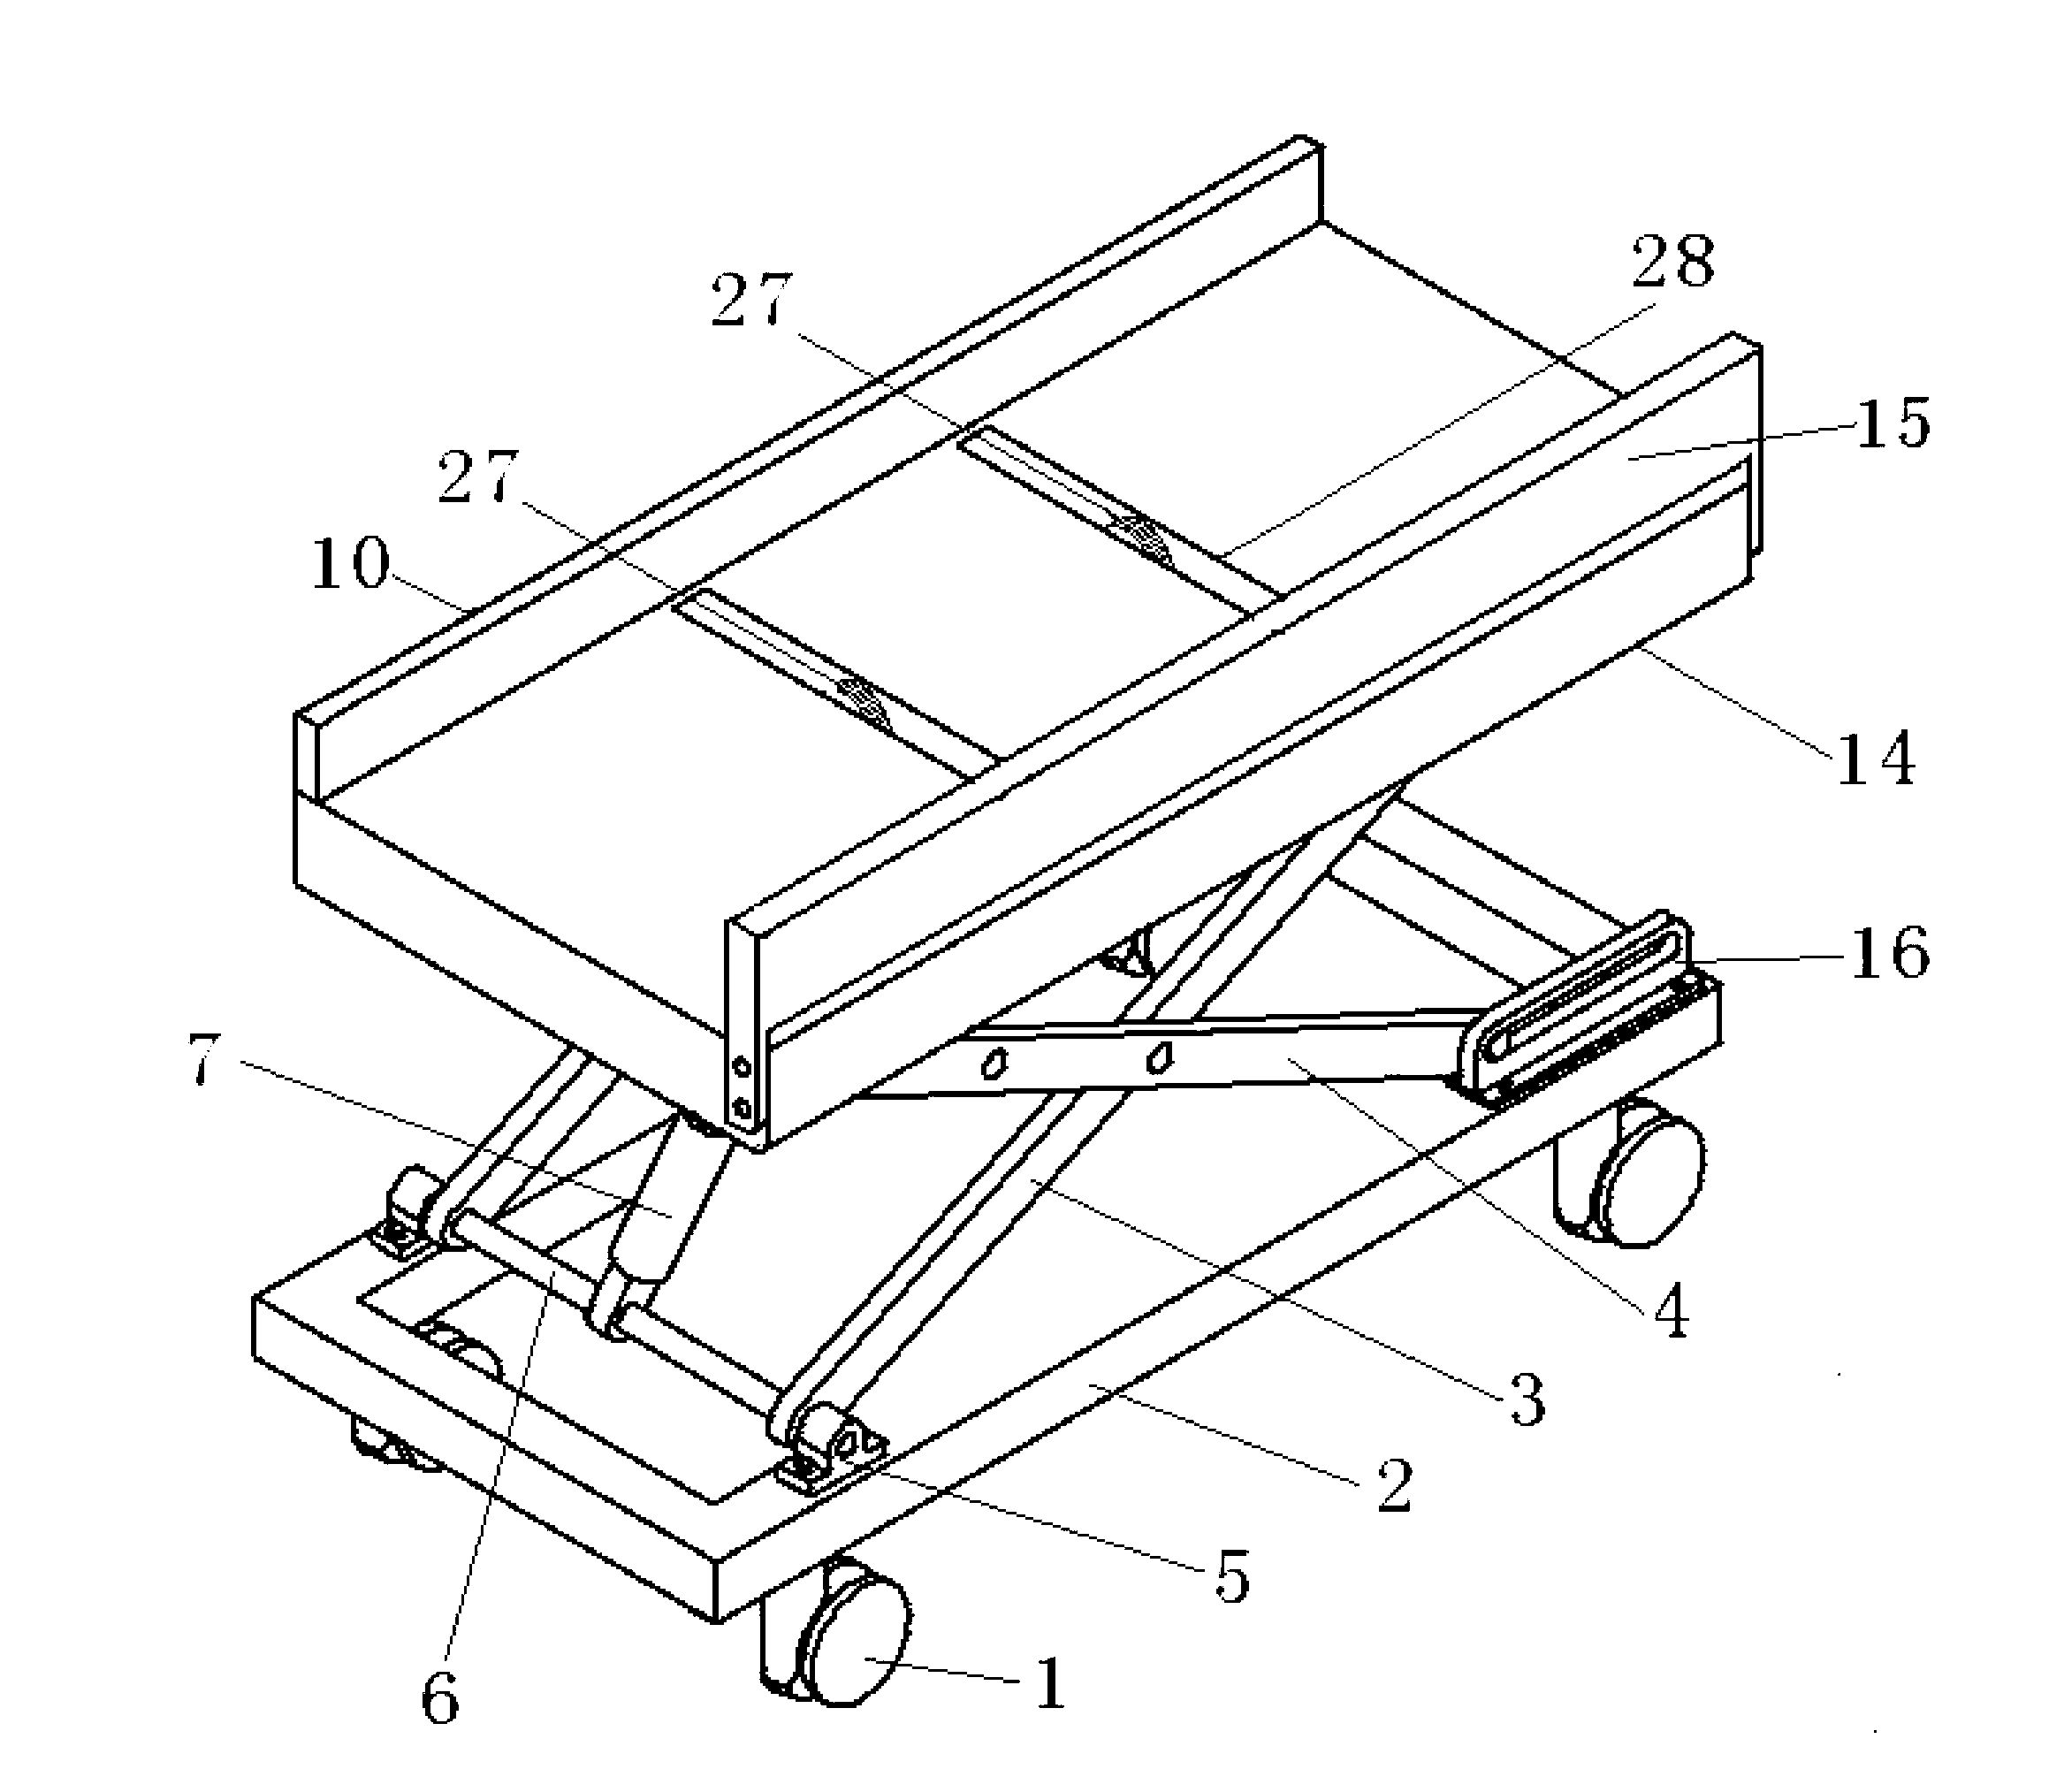 Stretcher vehicle capable of automatically and transversely moving patient